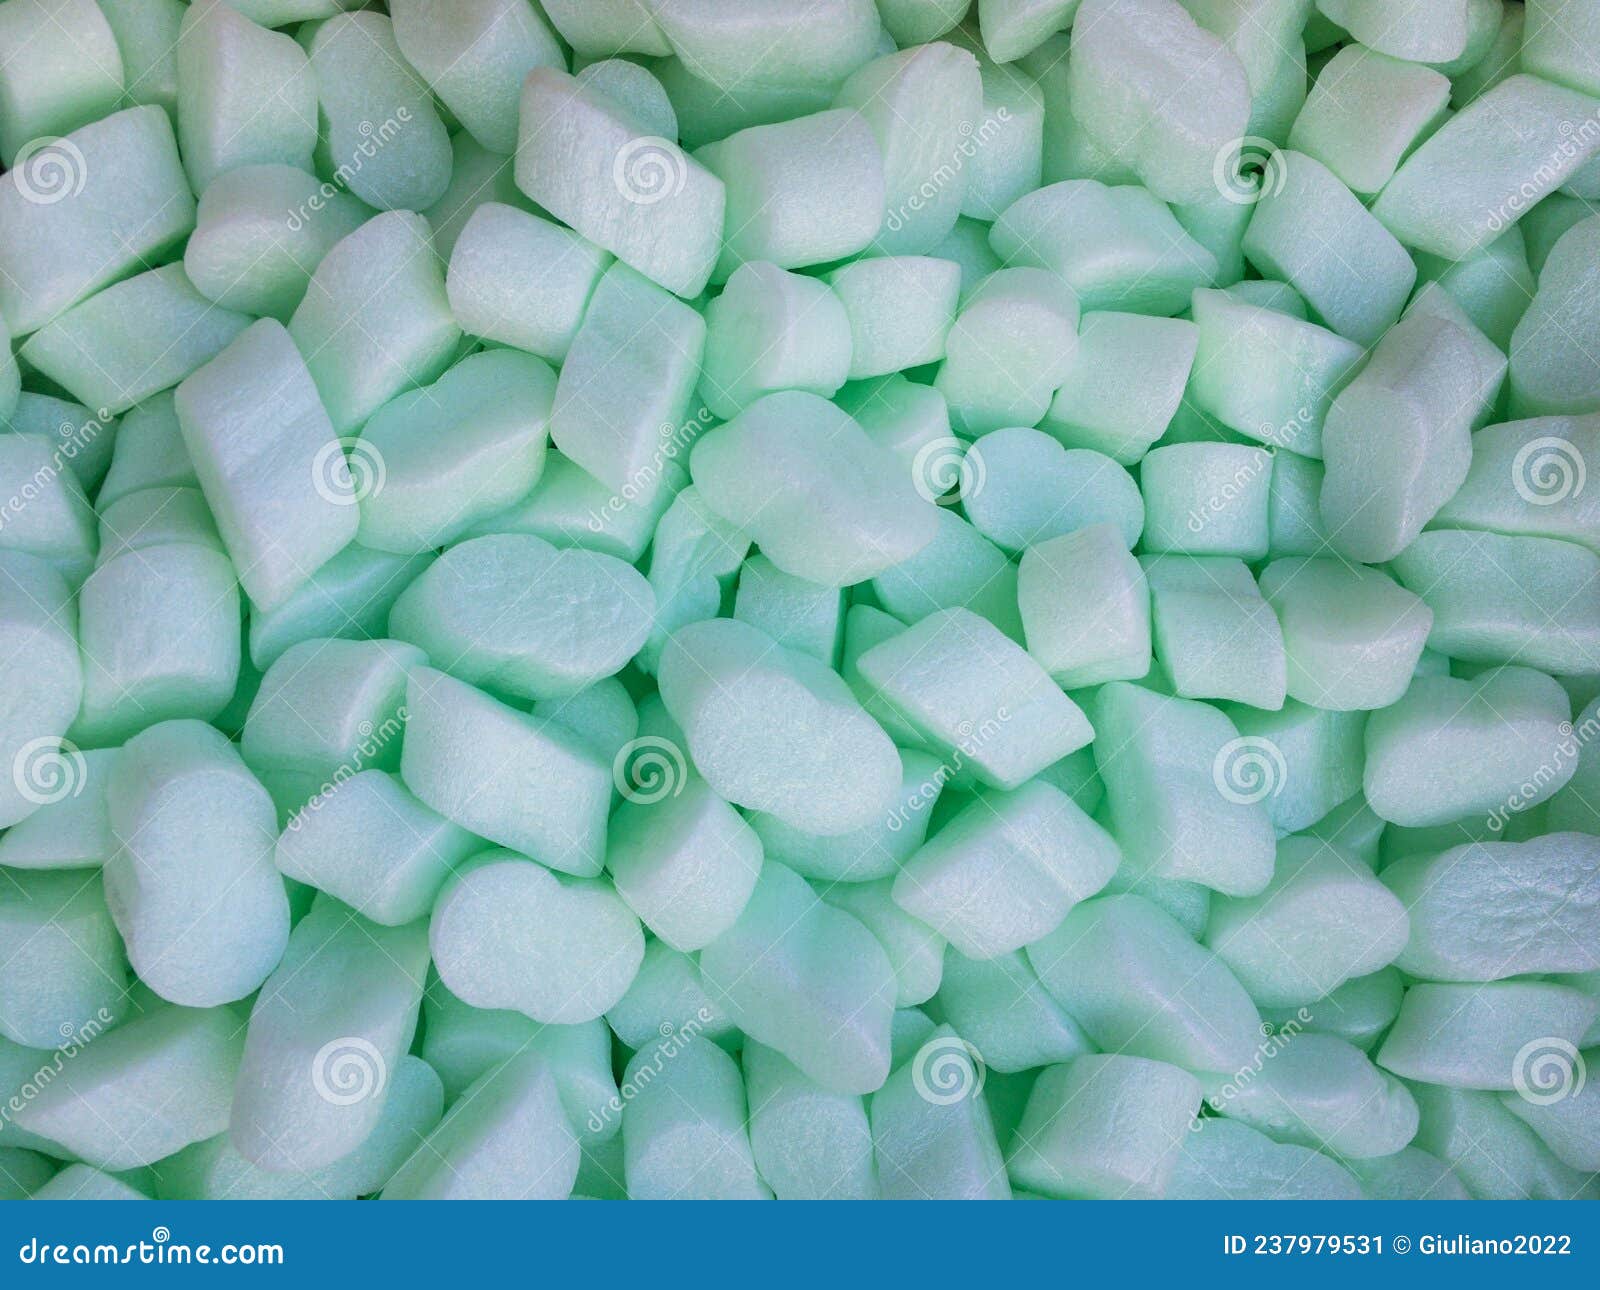 Polystyrene chips stock image. Image of colored, close - 237979531